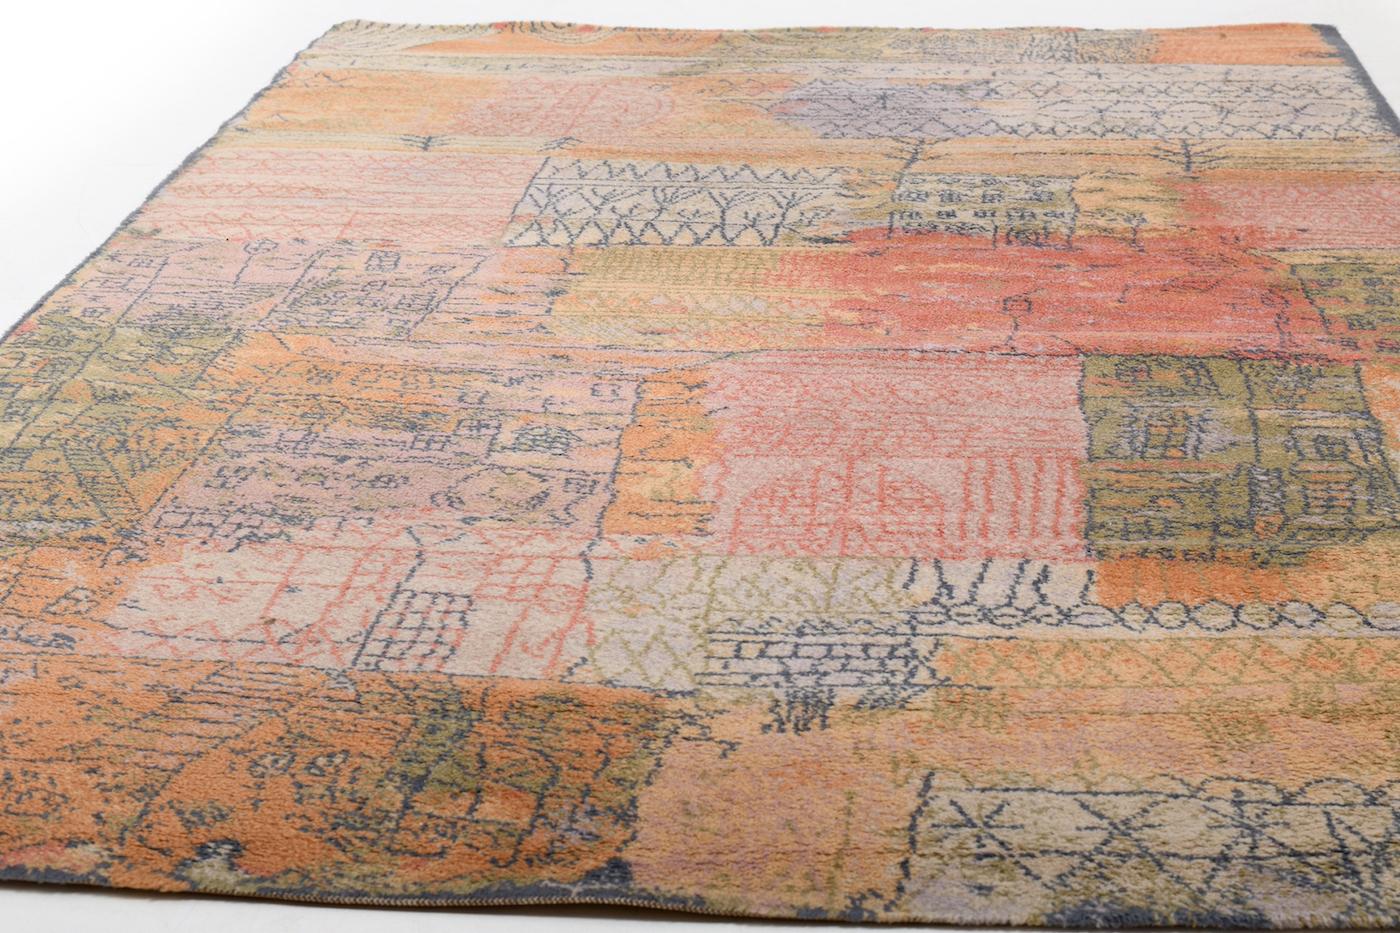 Large wool carpet / rug „Florentinisches Villenviertel“ after a work by Paul Klee(1879-1949) from 1926. Made by Ege Art Line Denmark.
Measures: 180 cm x 280 cm.